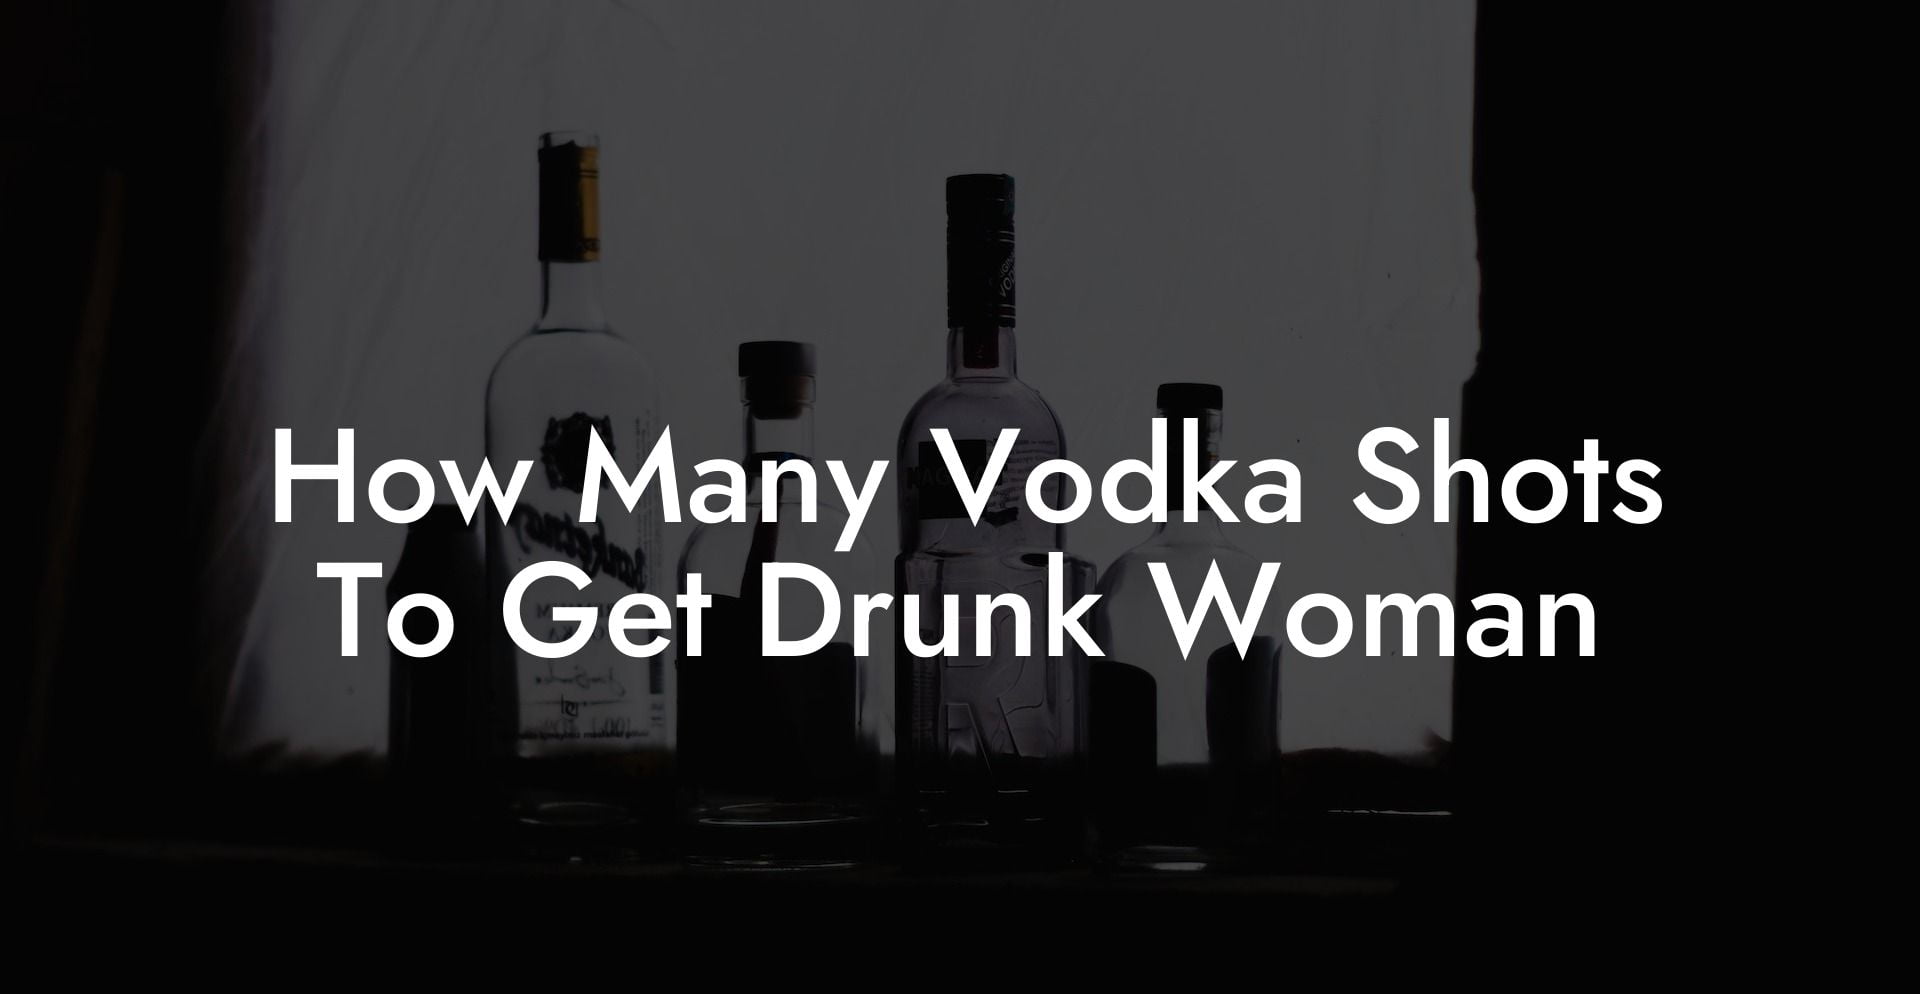 How Many Vodka Shots To Get Drunk Woman